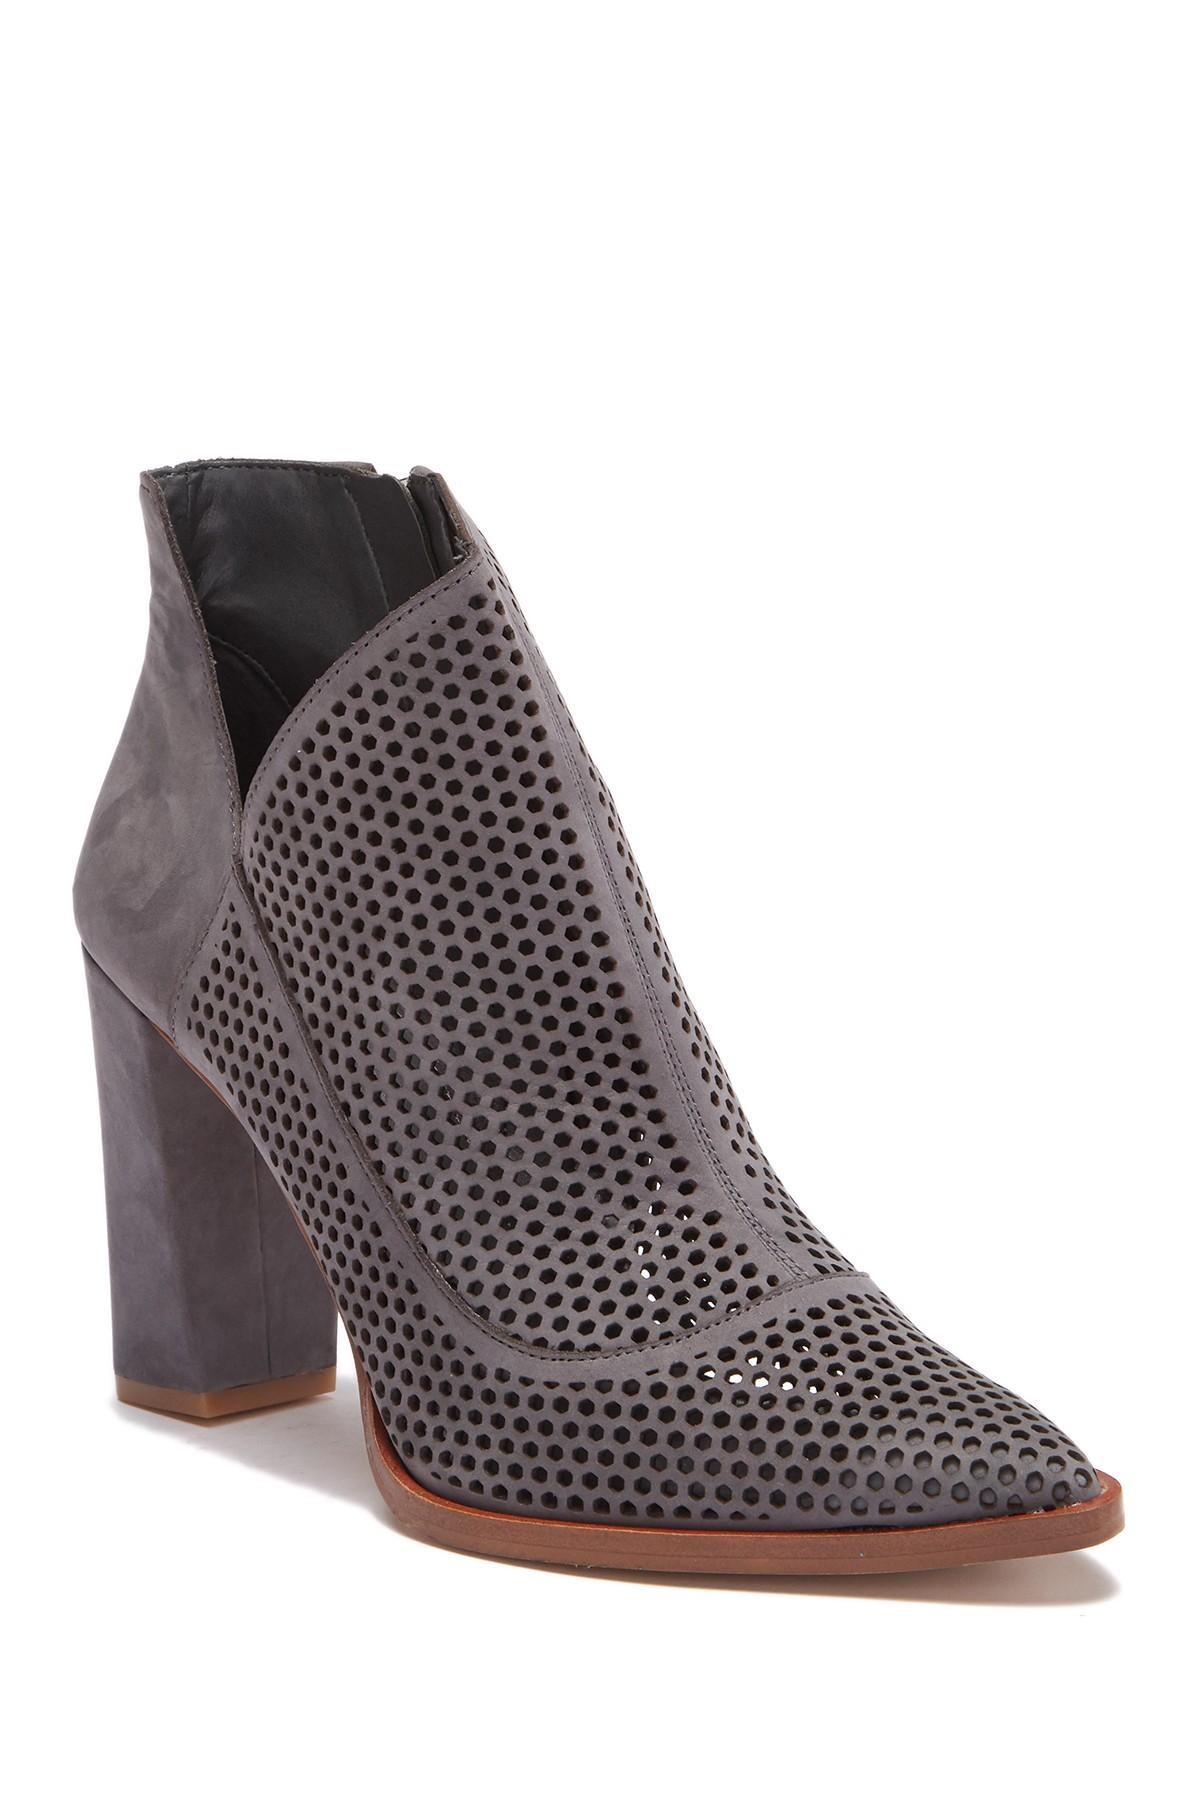 levesna bootie vince camuto